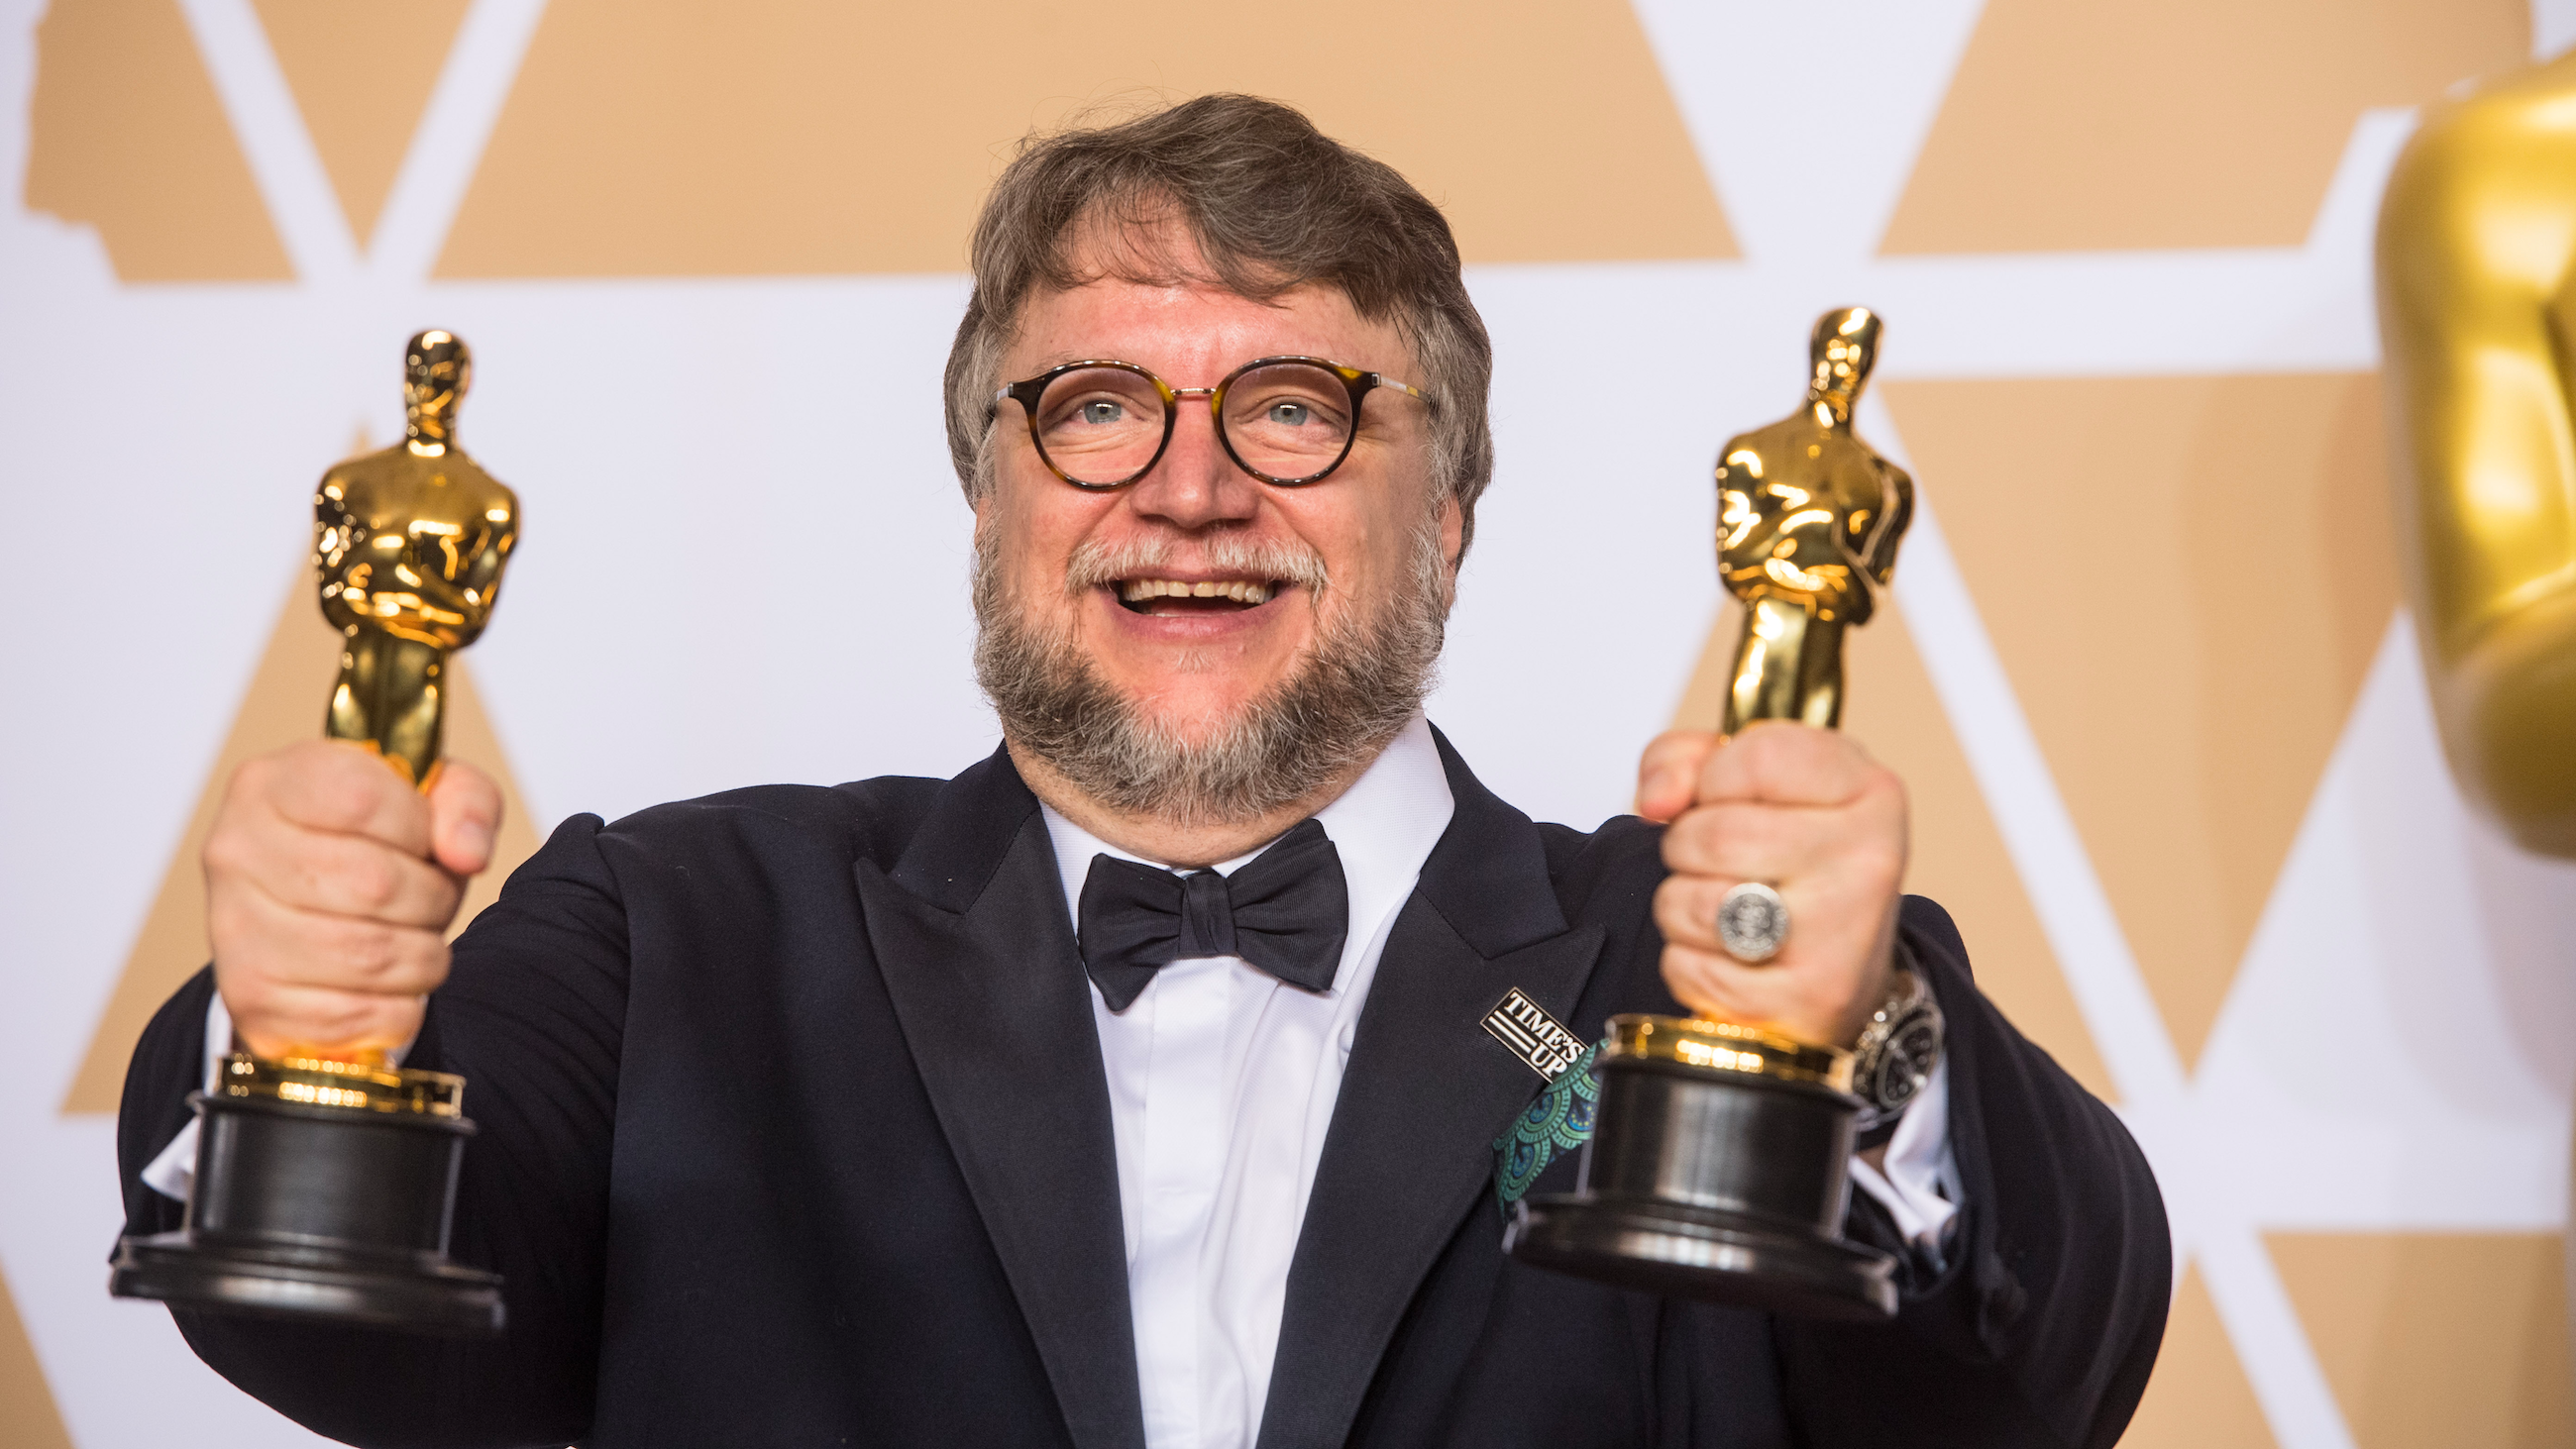 Guillermo Del Toro Made a Blatant Weed Joke to the Press After Securing Oscar Win